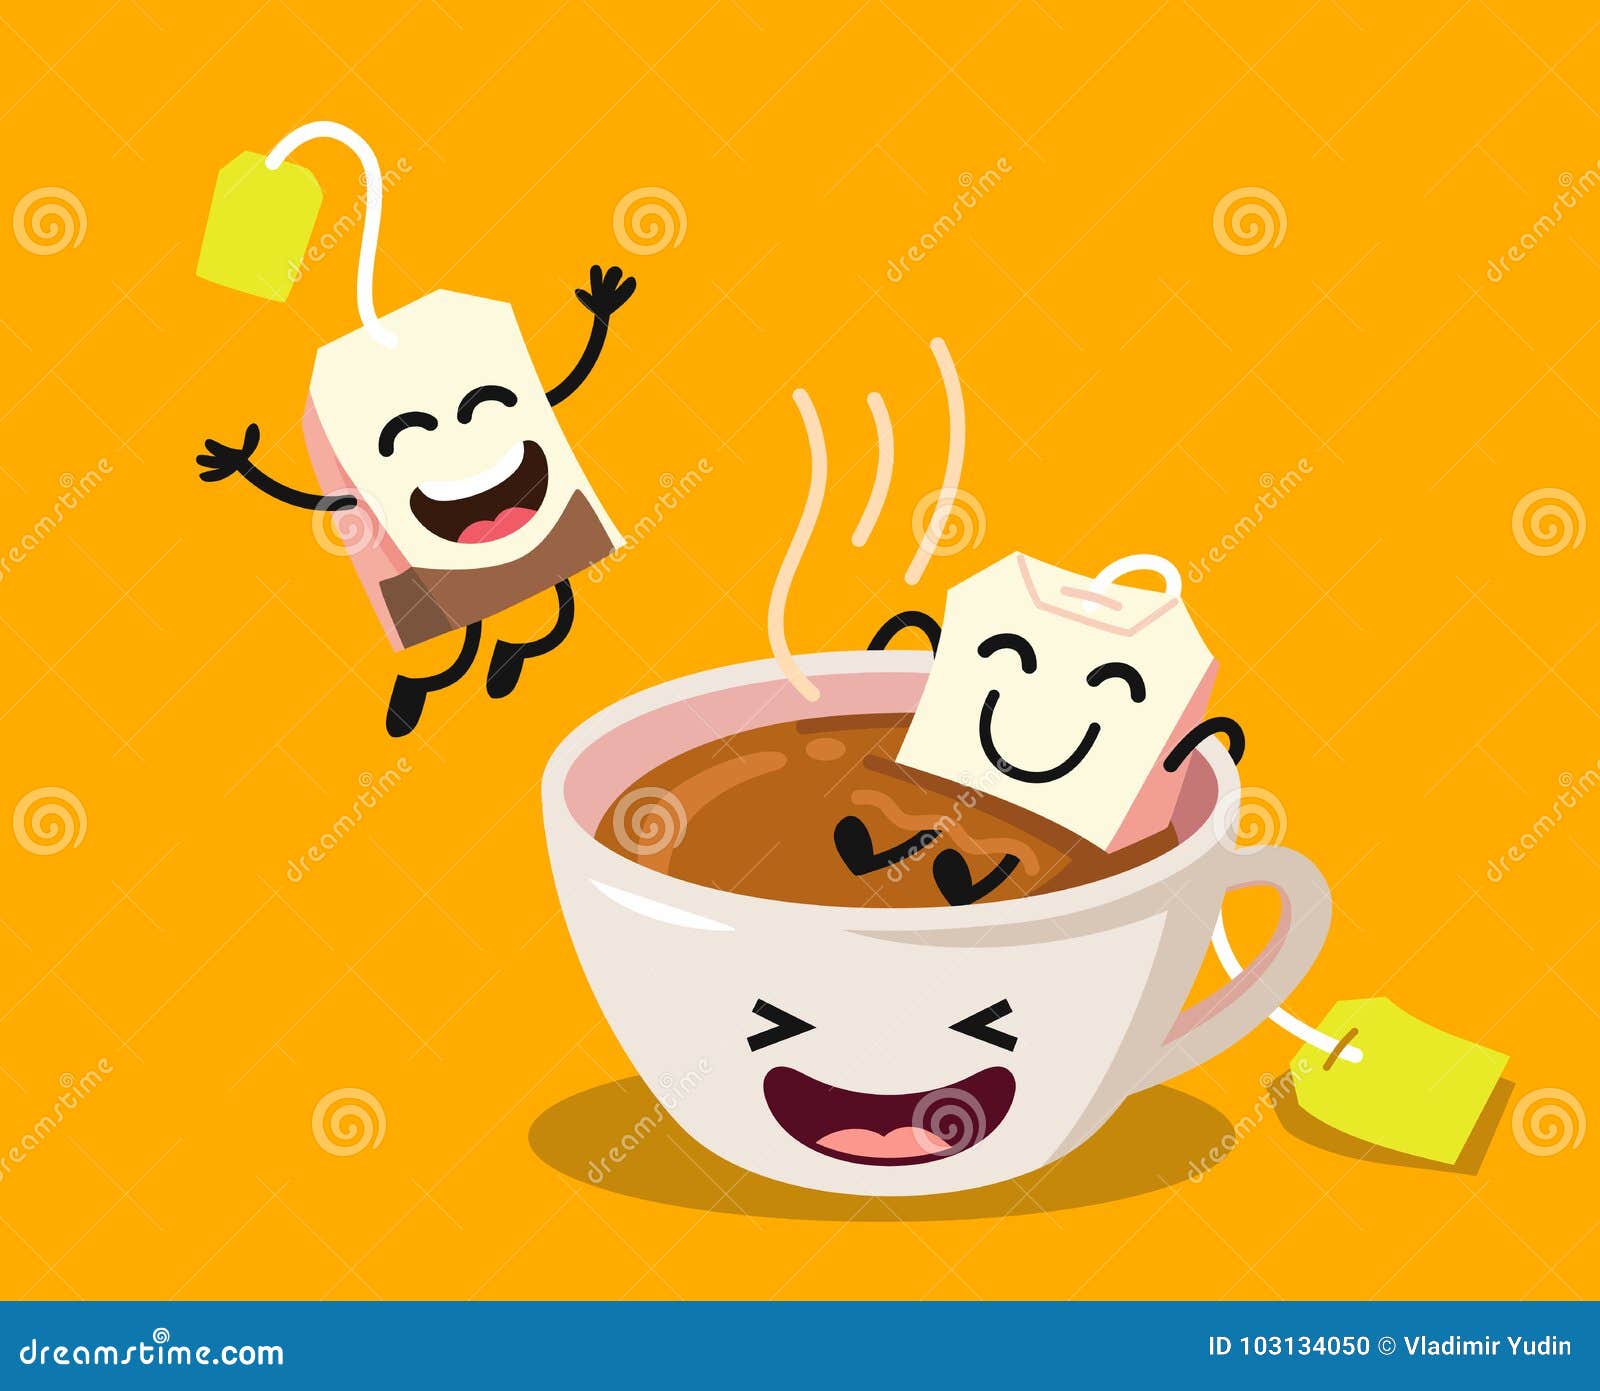 Cute Cartoon Cup Of Tea With Happy Tea Bags Stock Vector - Illustration Of  Character, Label: 103134050